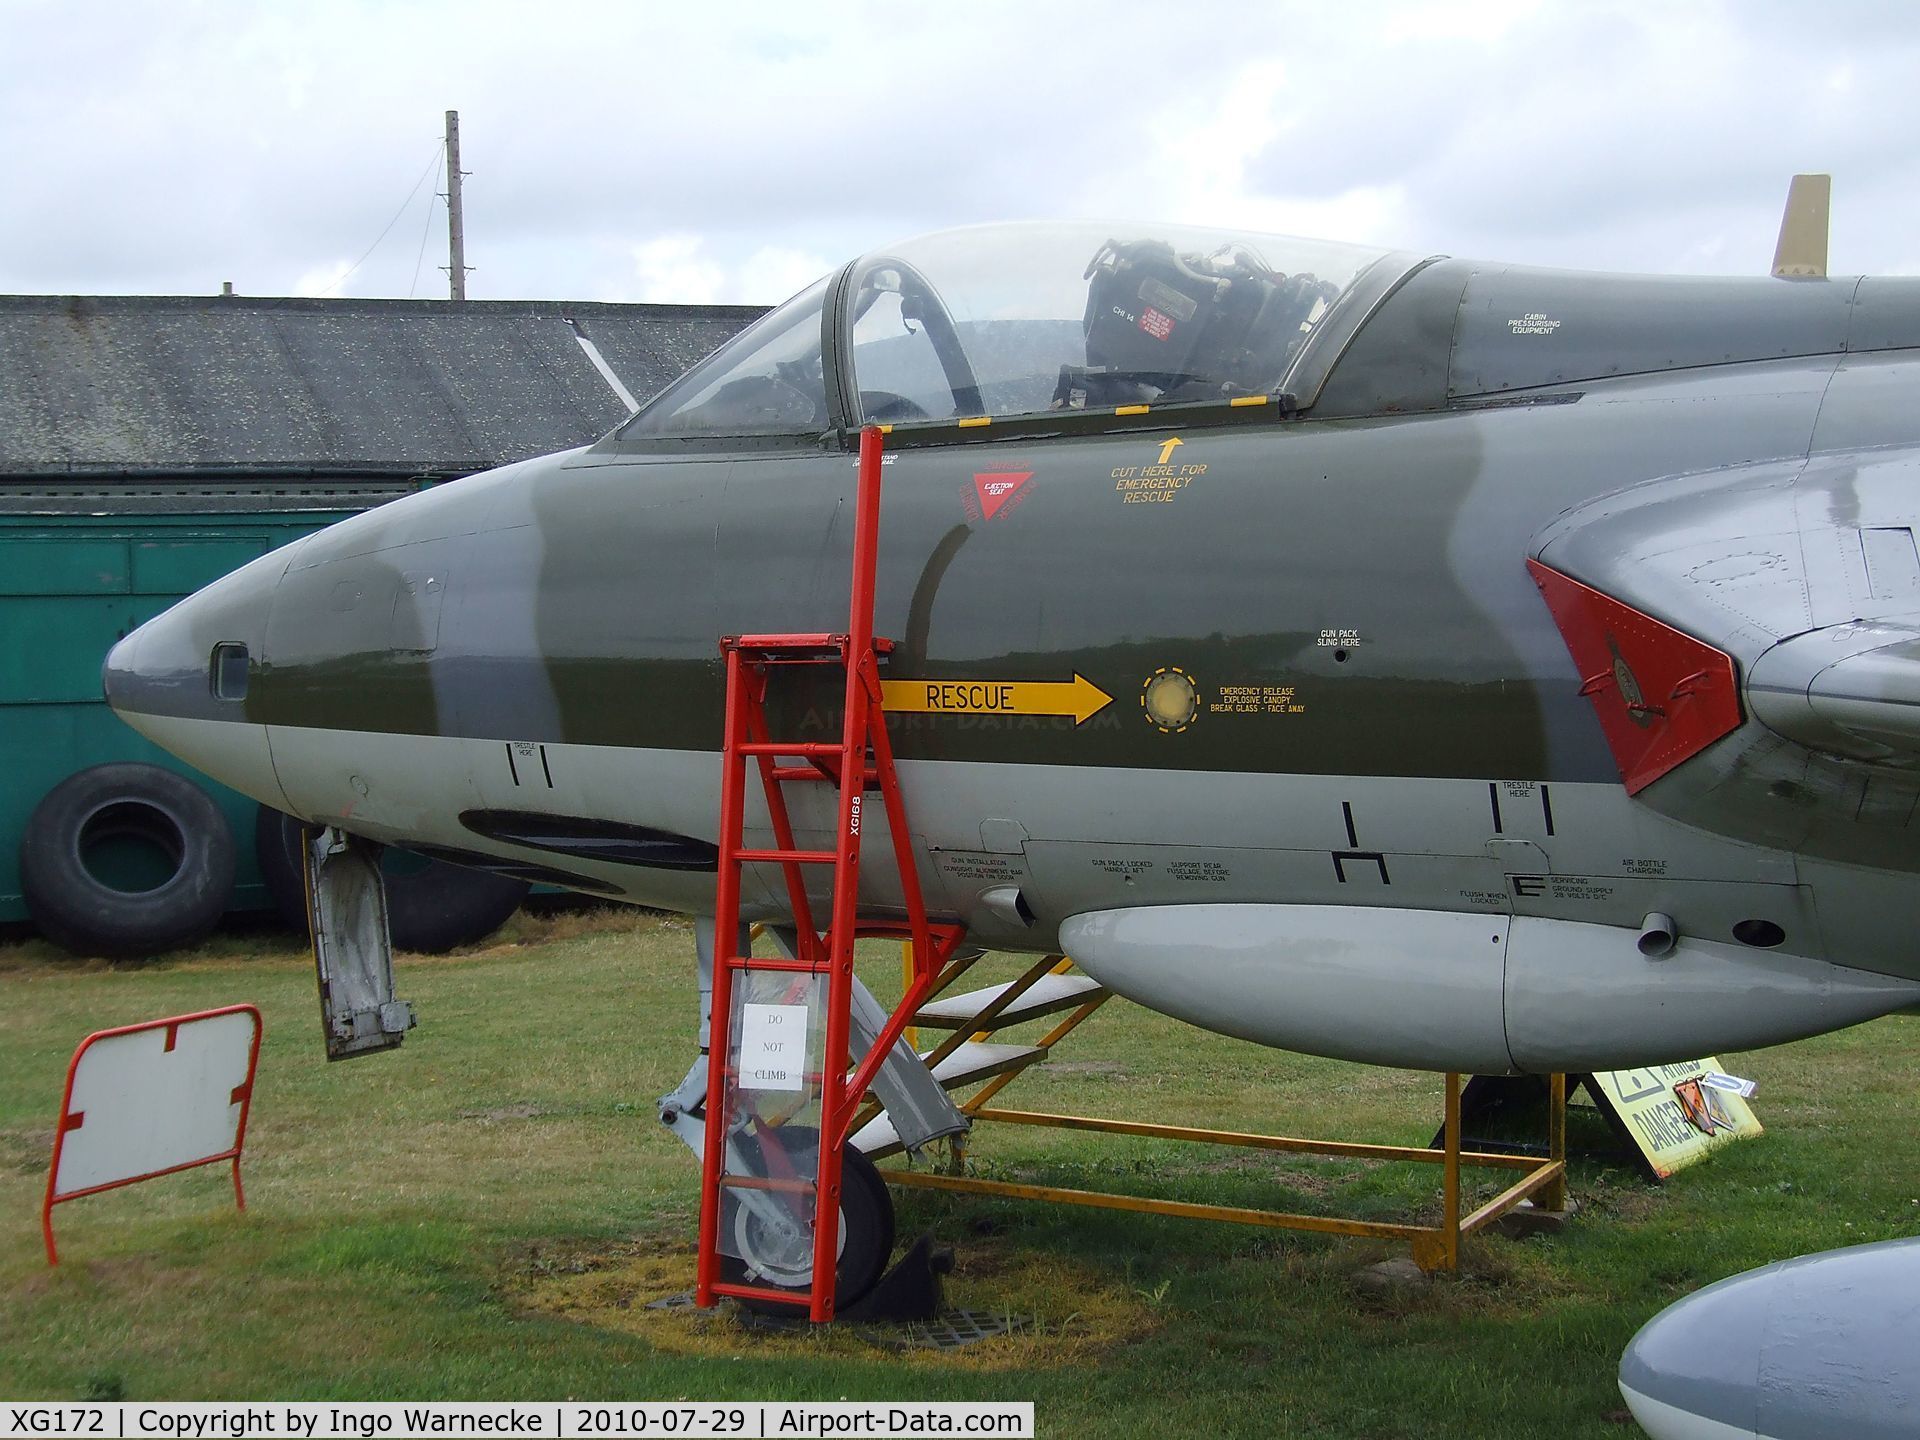 XG172, Hawker Hunter F.6A C/N 41H/680009, Hawker Hunter F6A (painted and marked as XG168) at the City of Norwich Aviation Museum